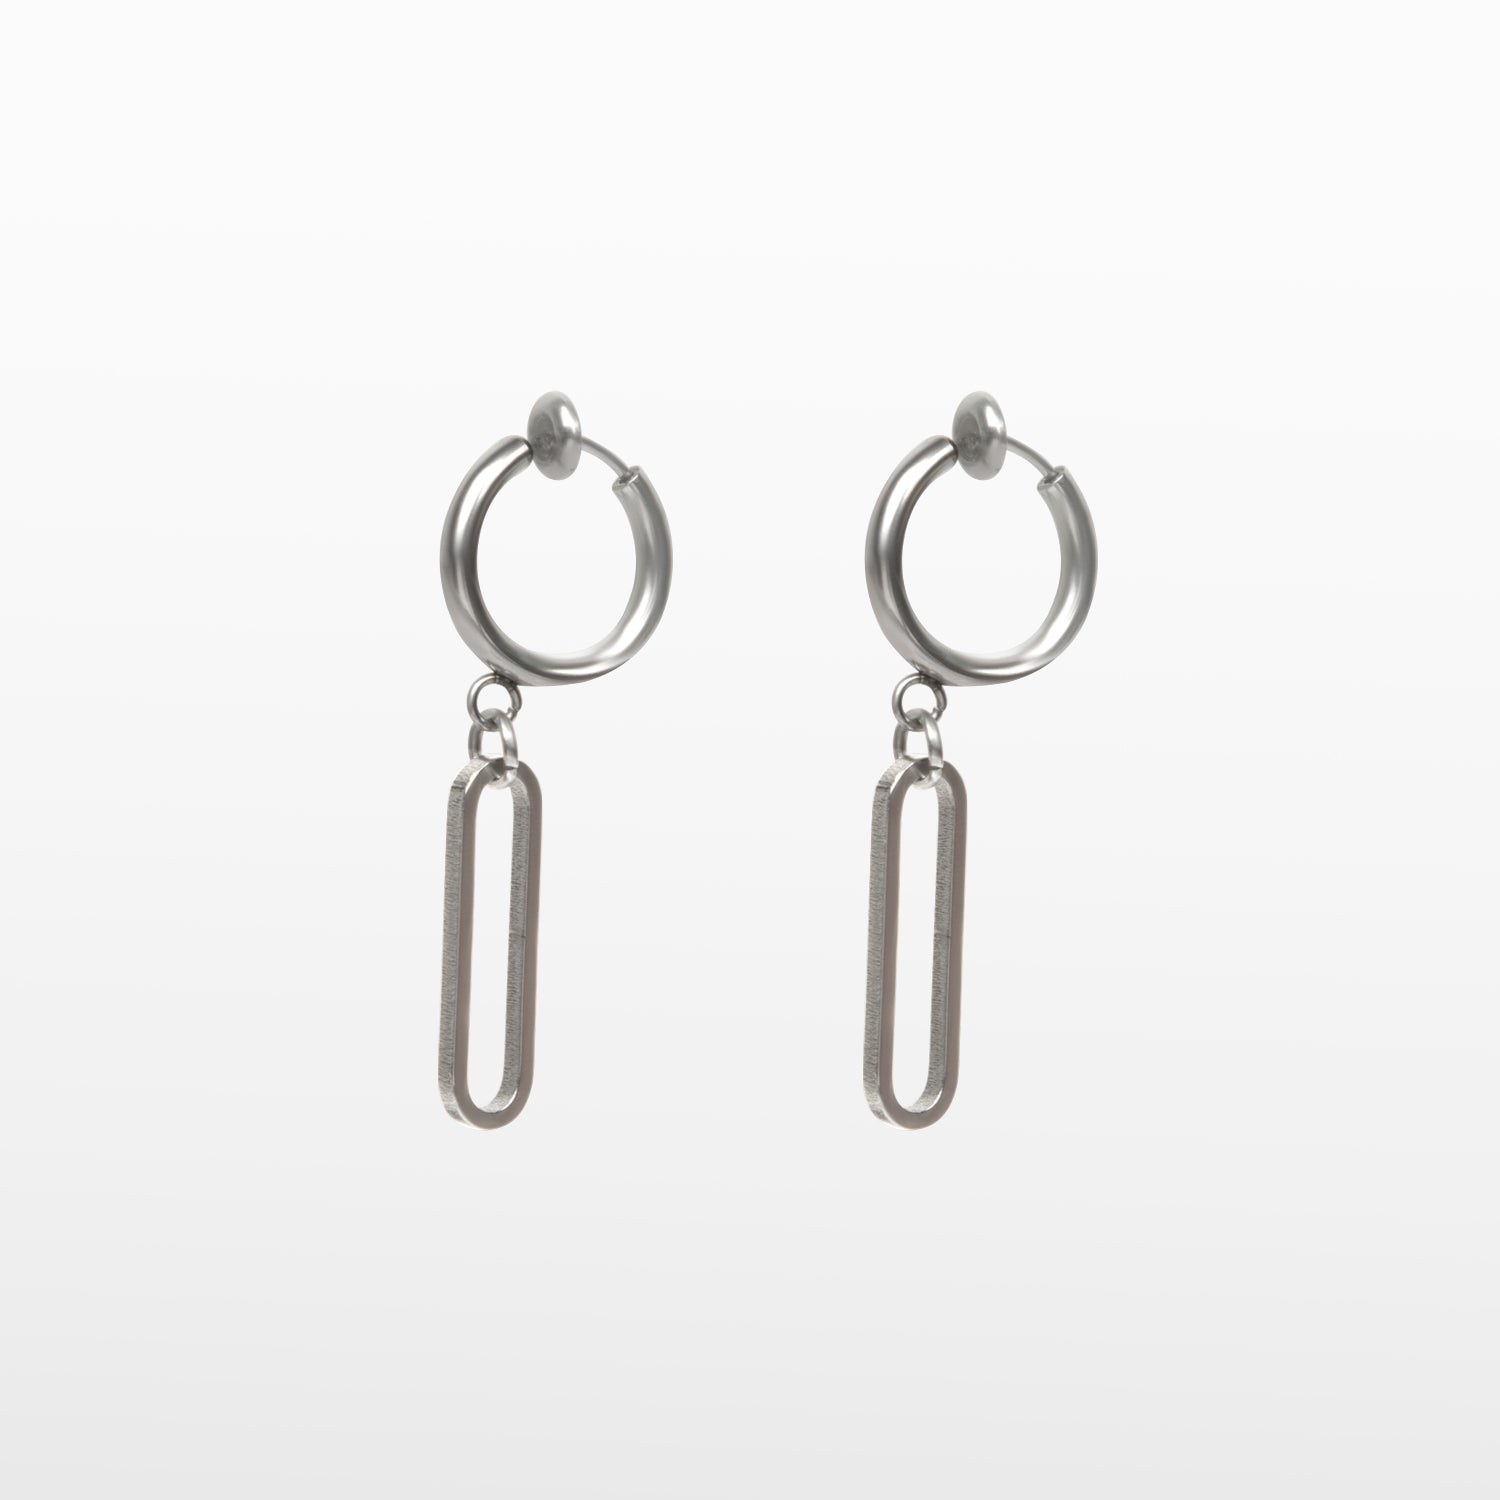 Image of the Silver Chain Clip On Earrings feature a sliding spring closure type which is optimal for those with small or thin ear lobes. These earrings provide a secure hold for up to 4 hours and automatically adjust to ear thickness. As an added bonus, they are non-tarnishing and water resistant. Note, item includes one pair.